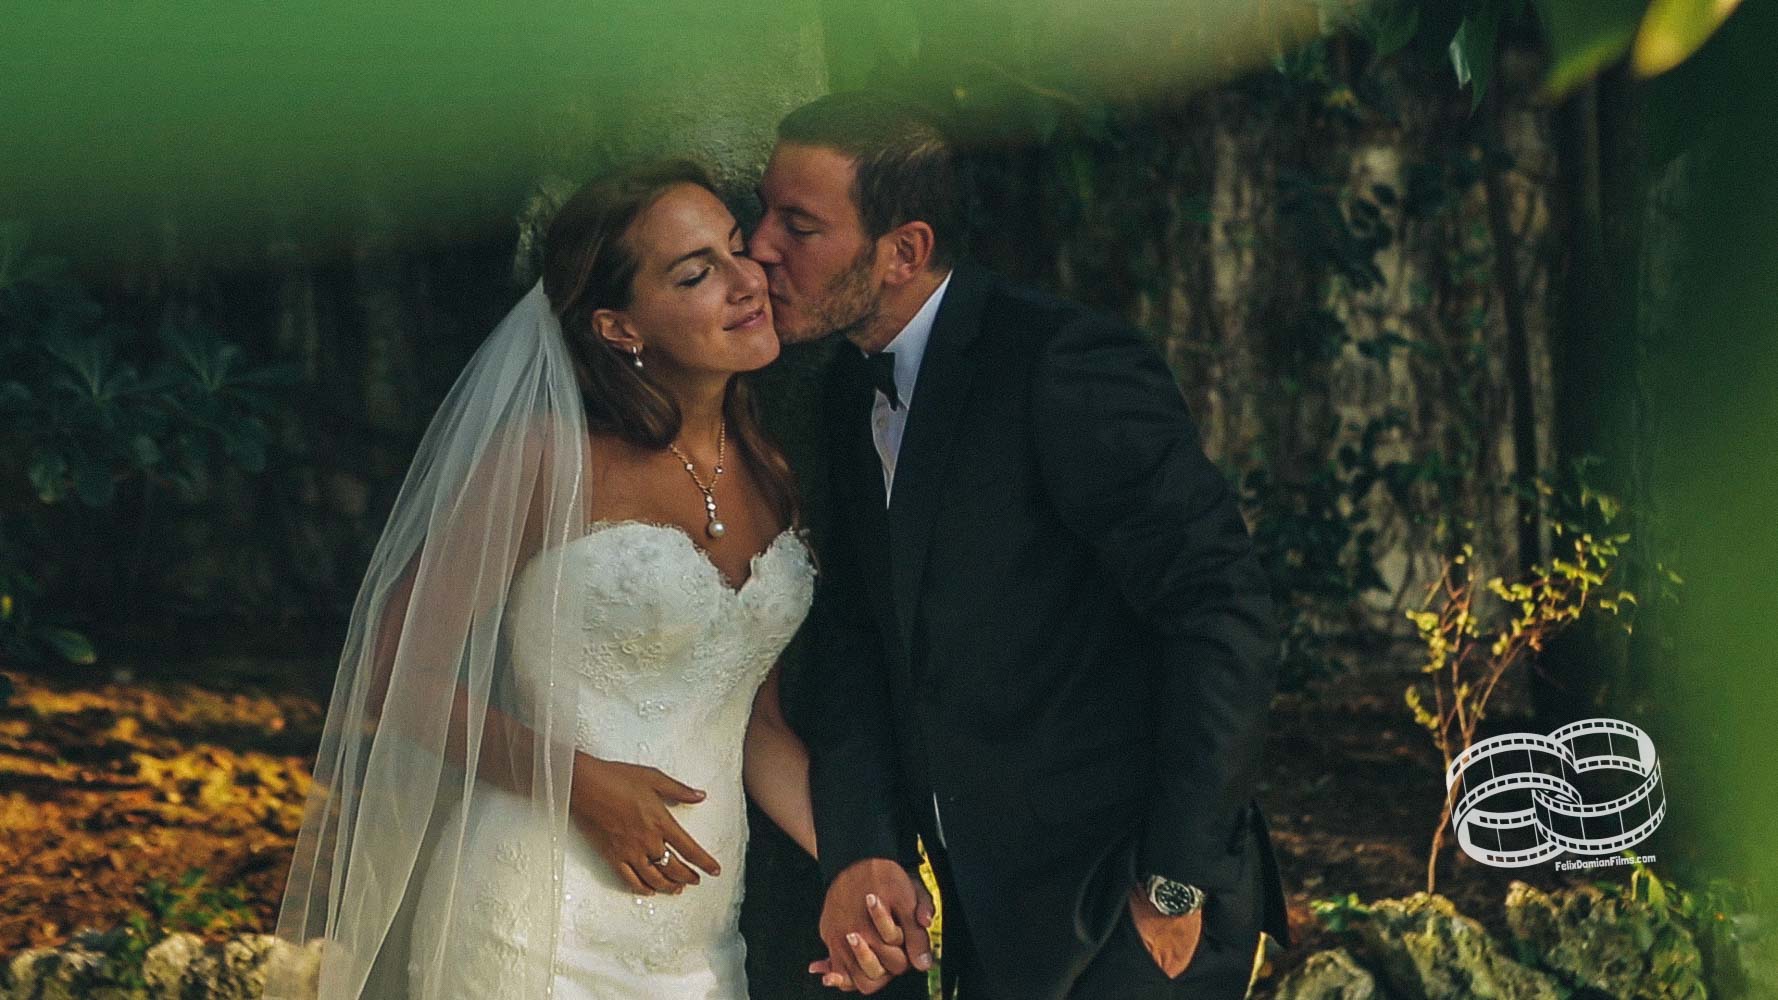 Ilke & Selim – “Love in Madrid”, great moments from an inspiring wedding